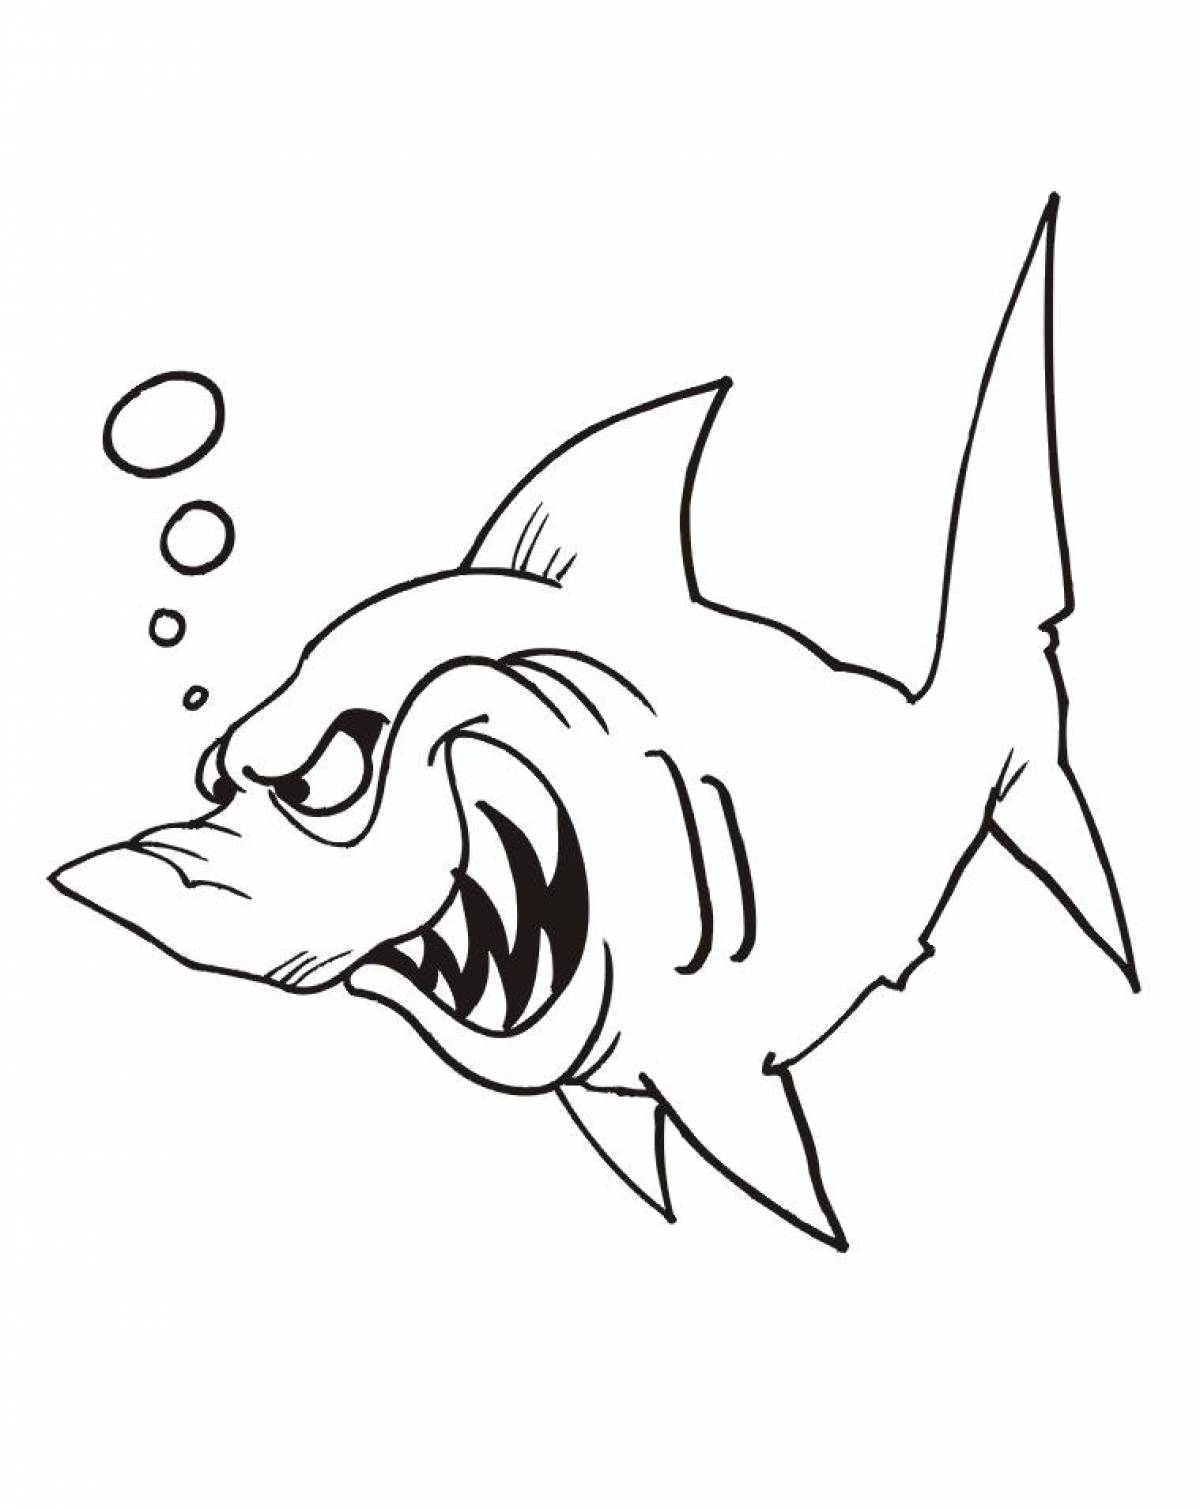 Creative shark coloring book for kids